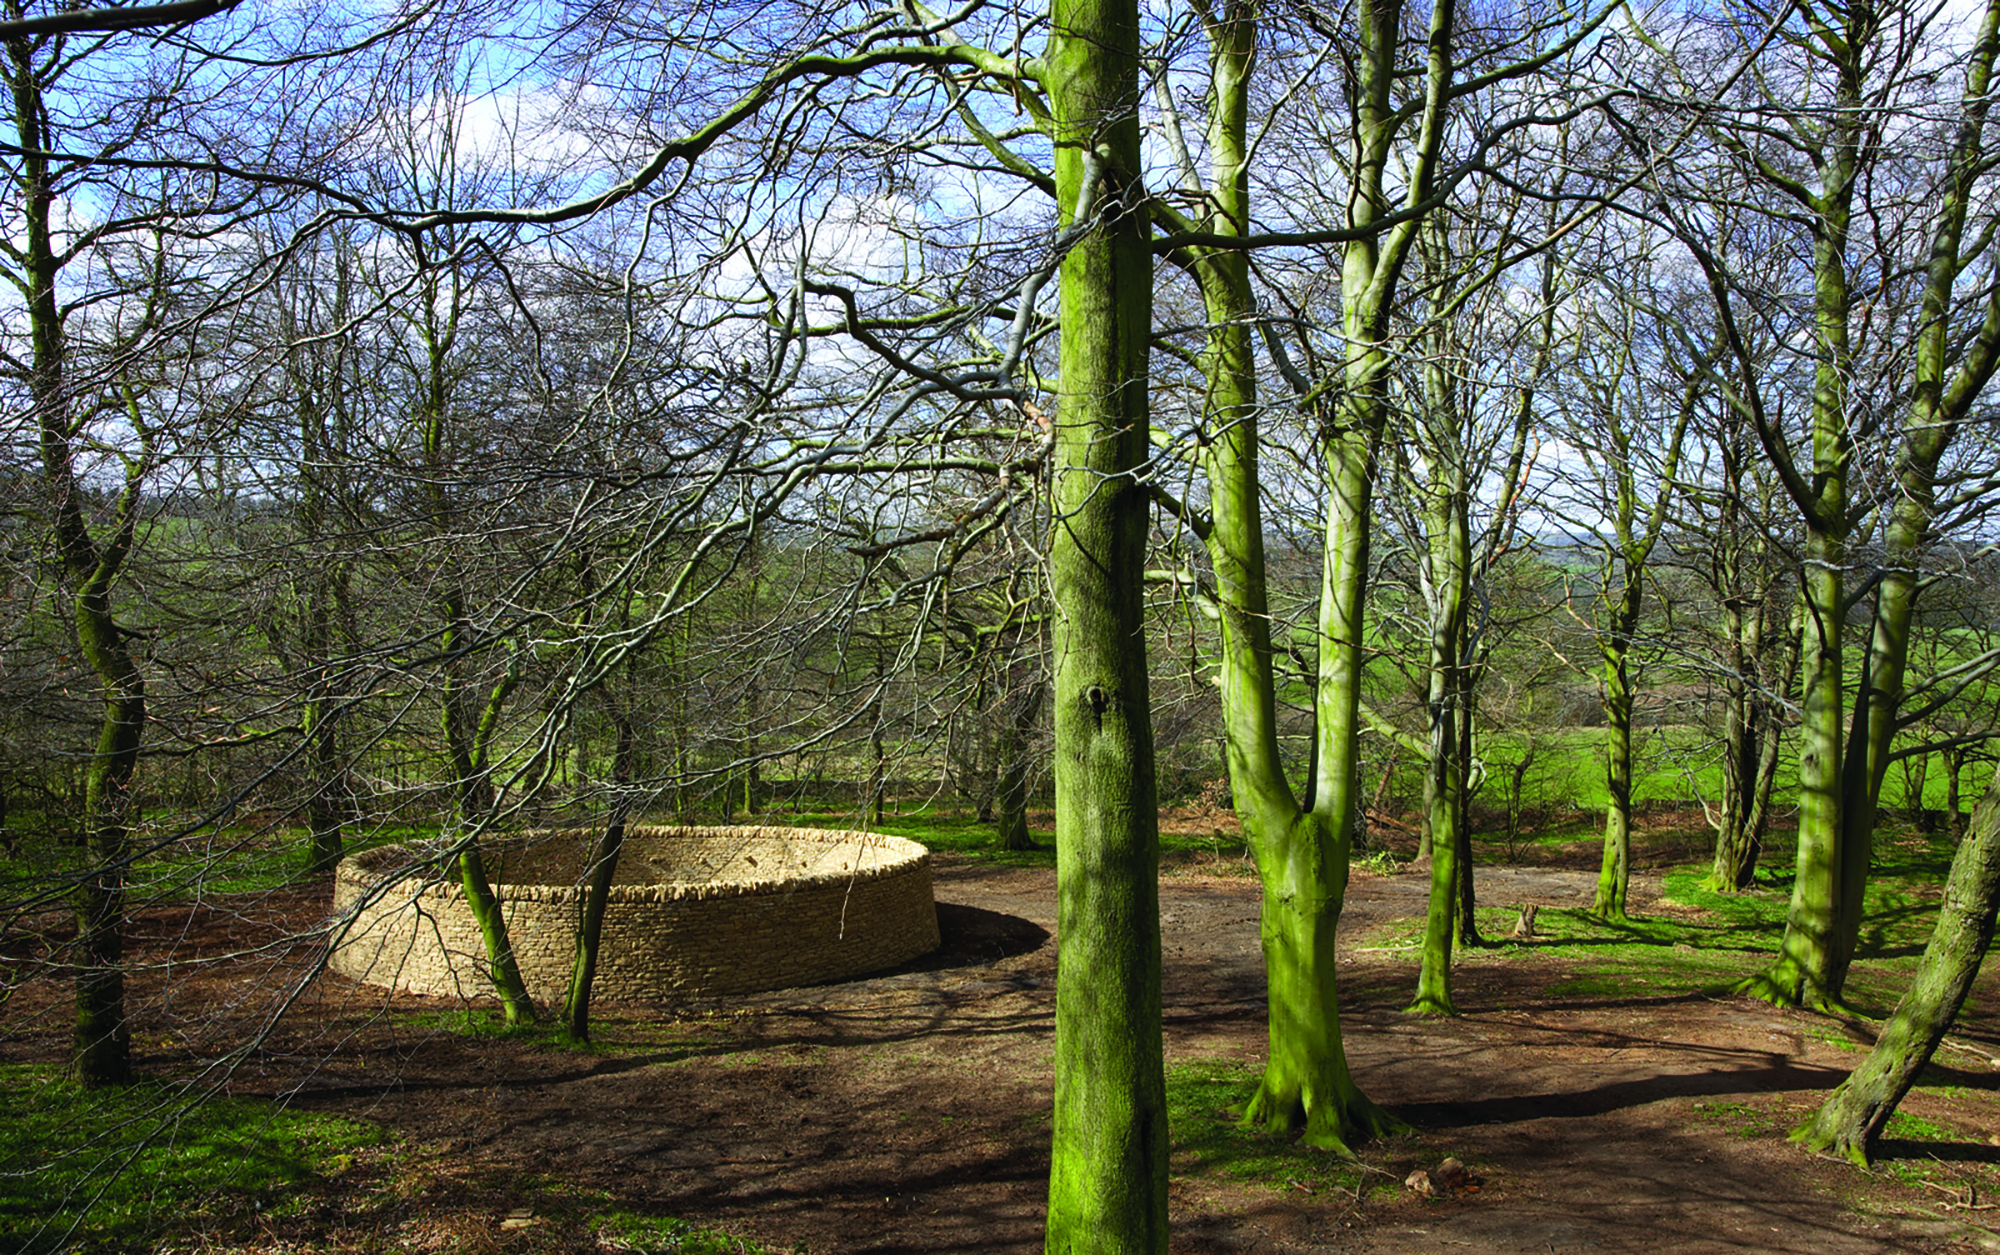 Andy Goldsworthy Outclosure 2007 at Yorkshire Sculpture Park